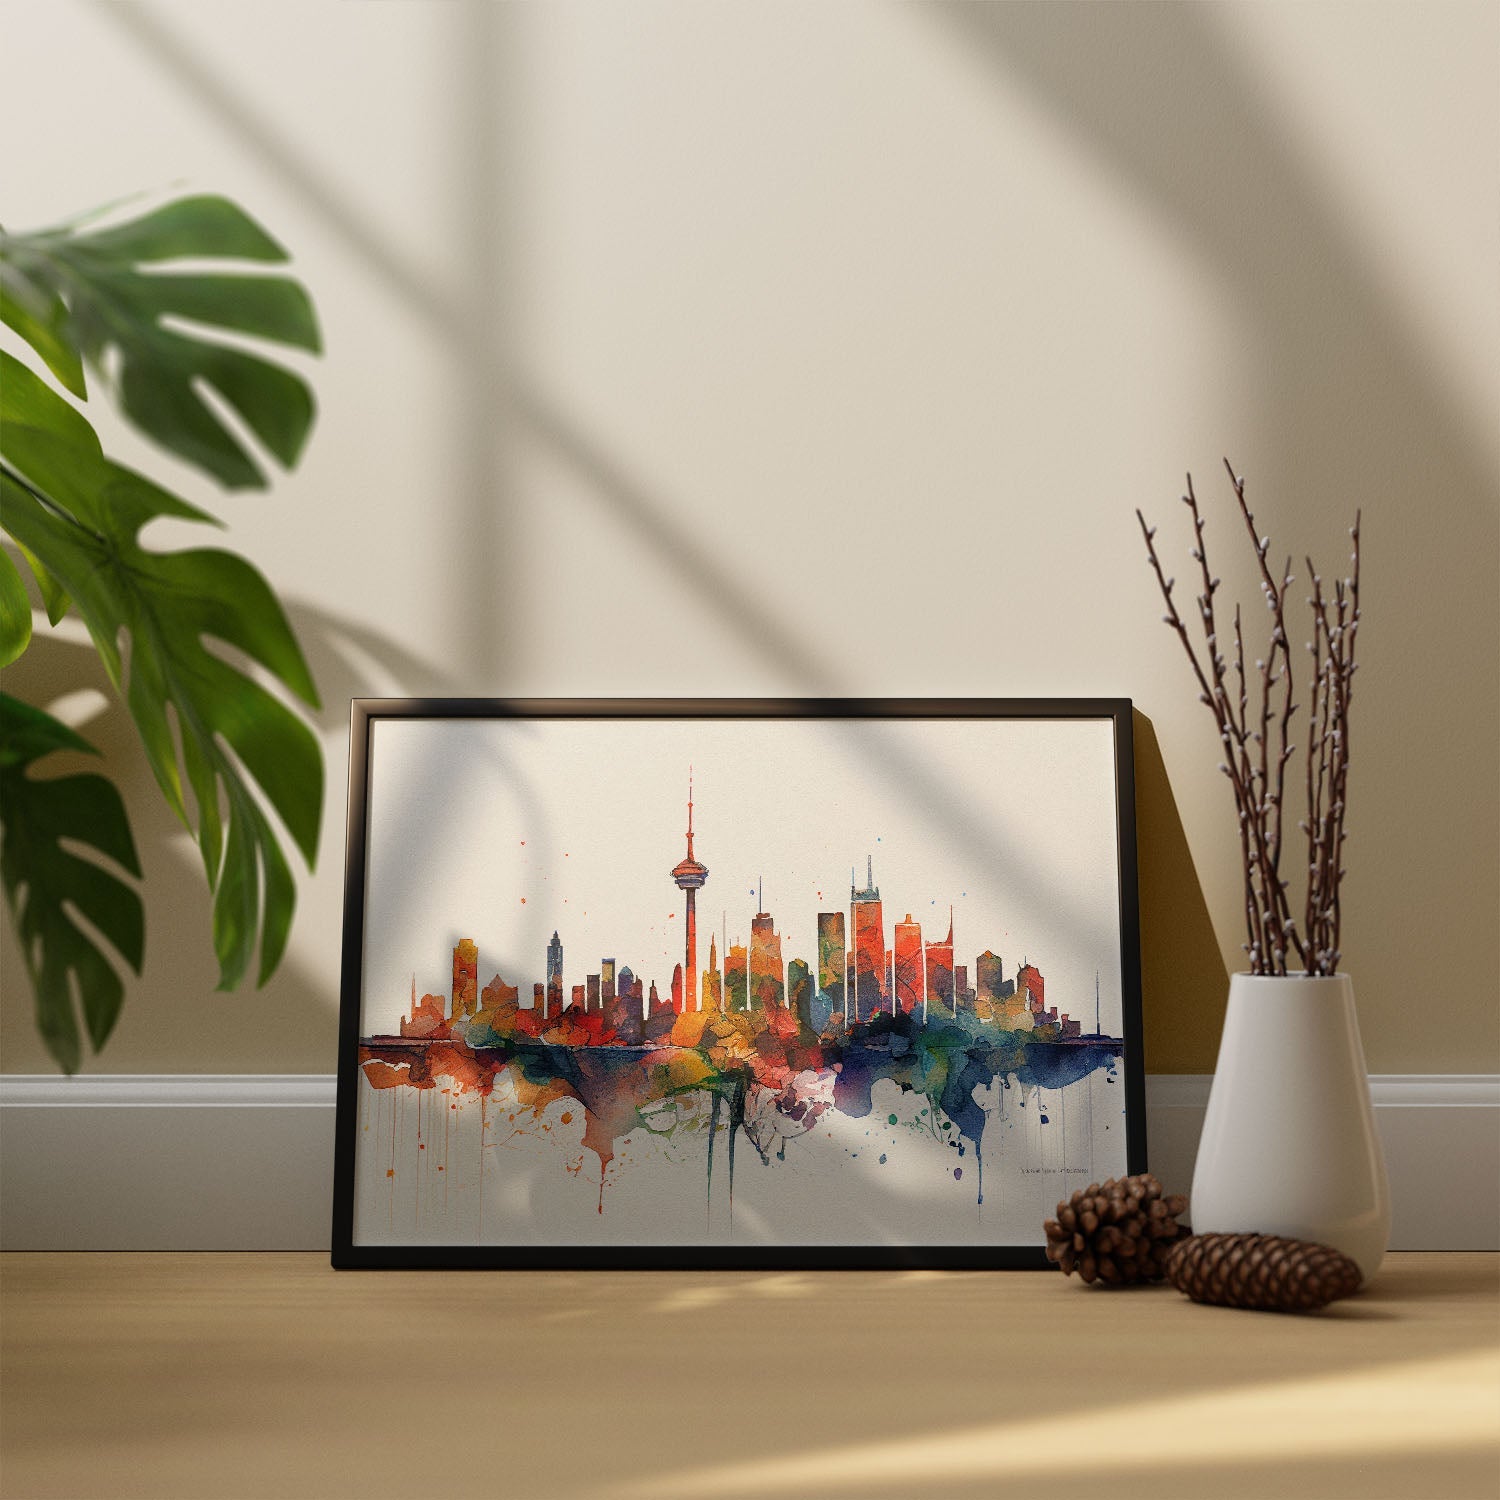 Nacnic watercolor of a skyline of the city of Toronto_2. Aesthetic Wall Art Prints for Bedroom or Living Room Design.-Artwork-Nacnic-A4-Sin Marco-Nacnic Estudio SL